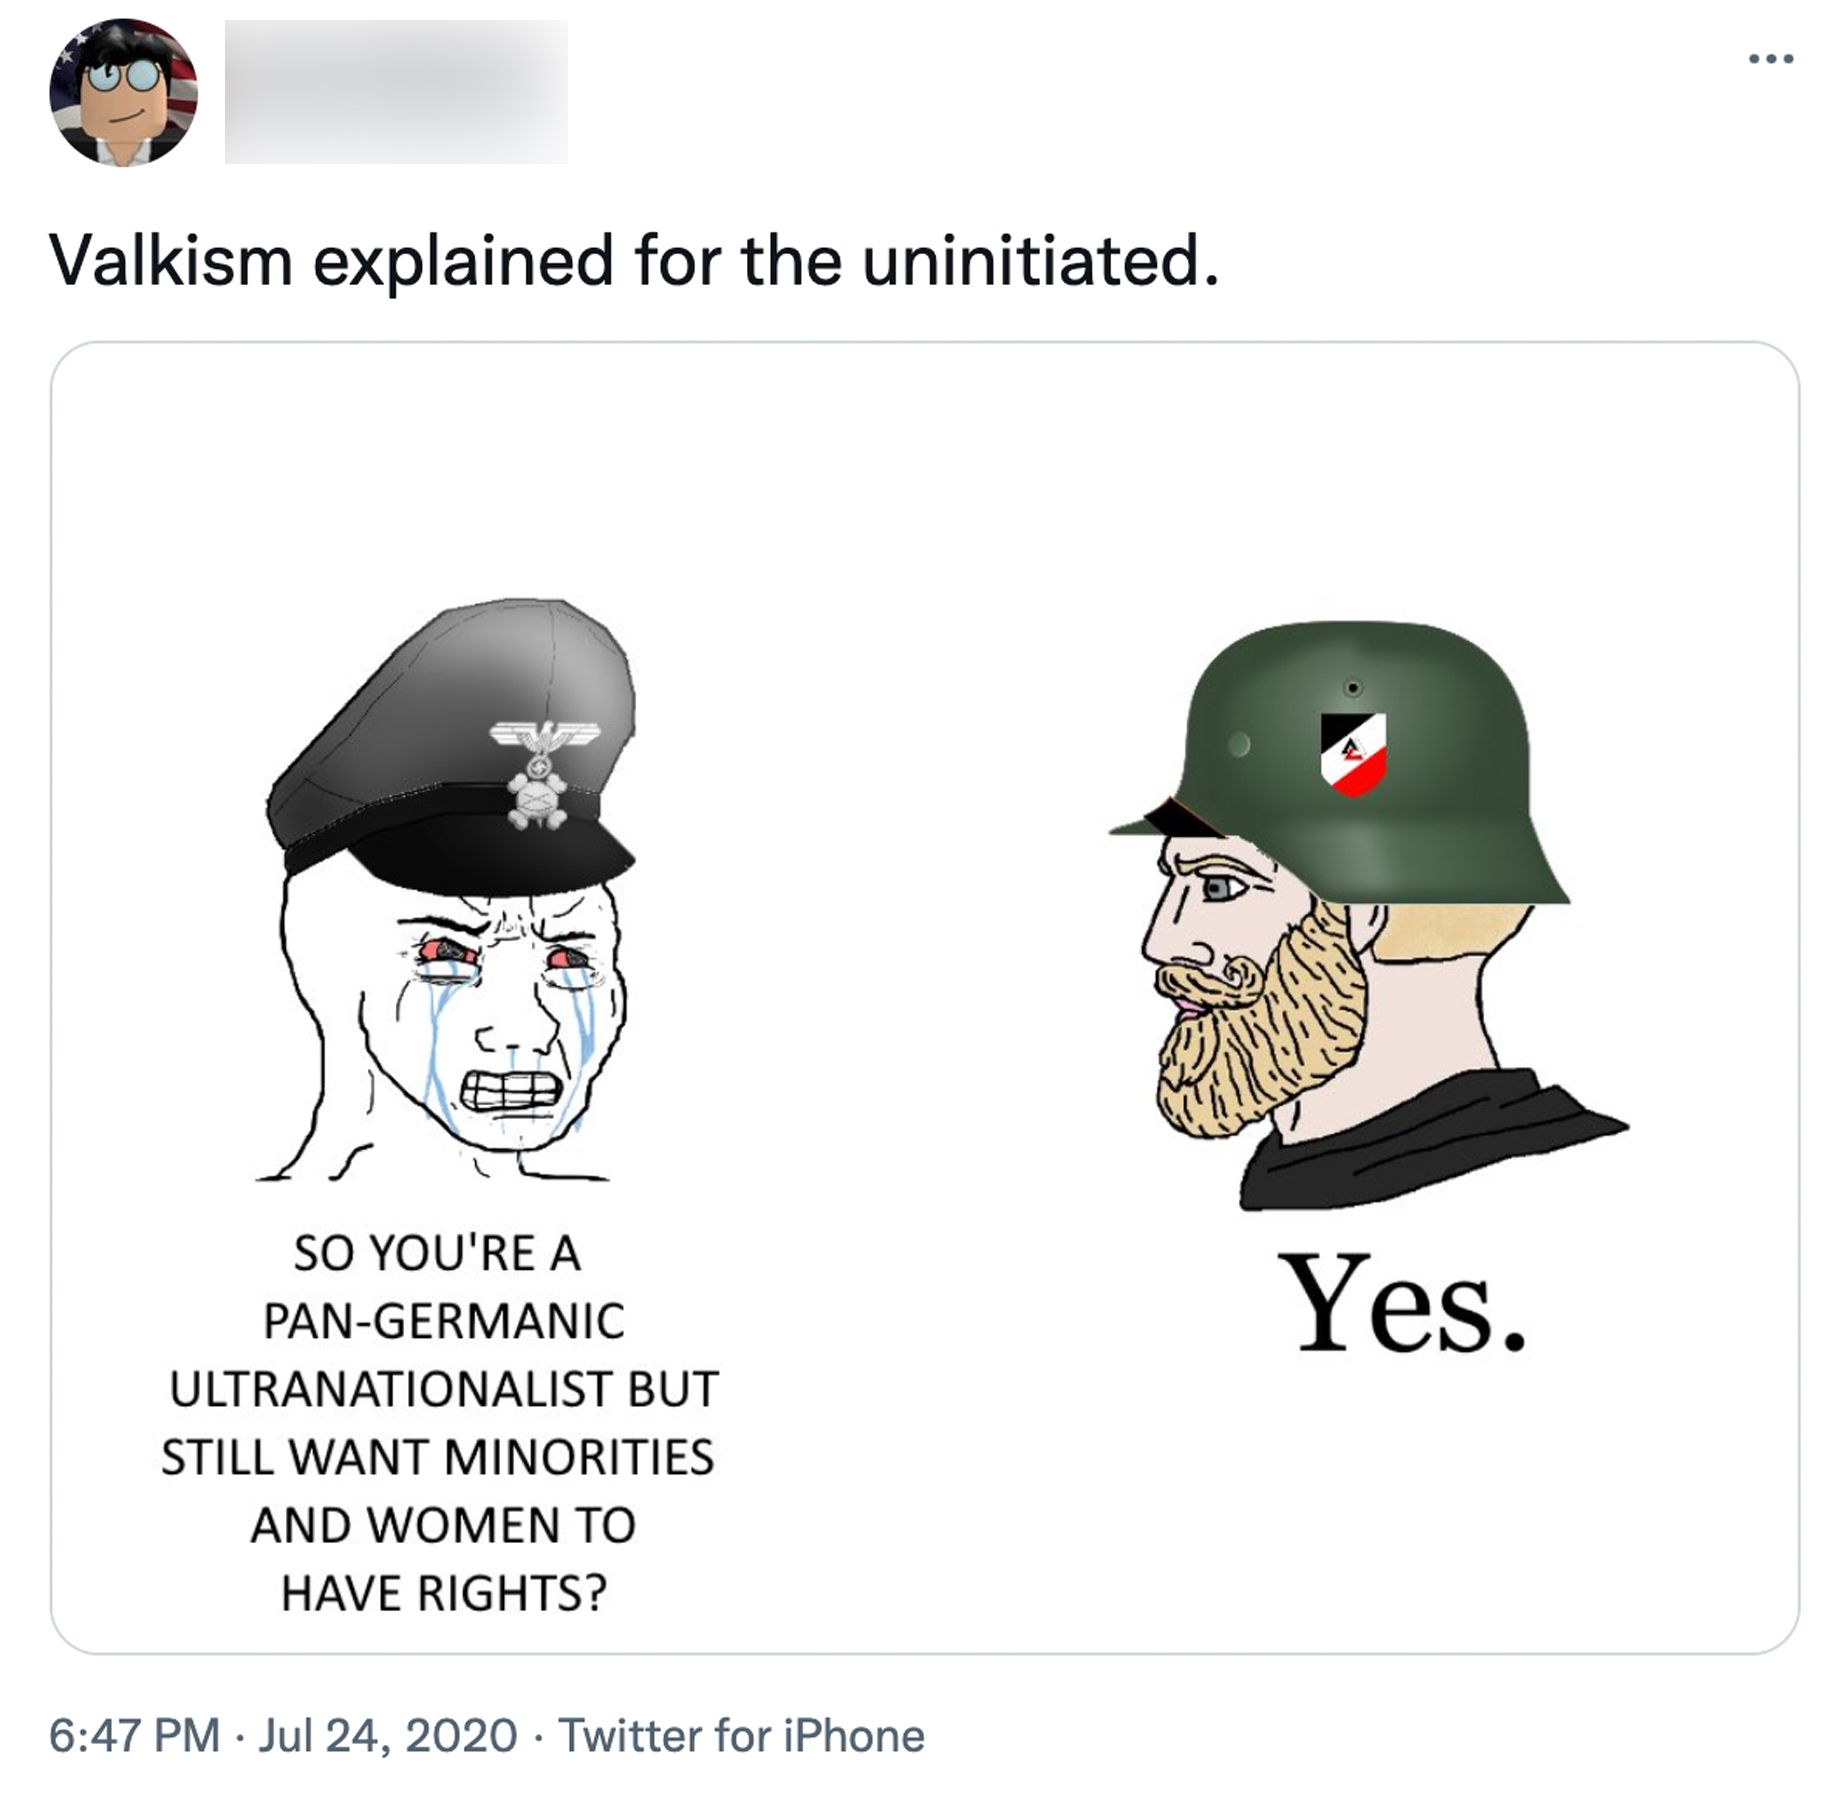 A meme explaining Valkism for the uninitiated, the crying Wojak is wearing Nazi insignia